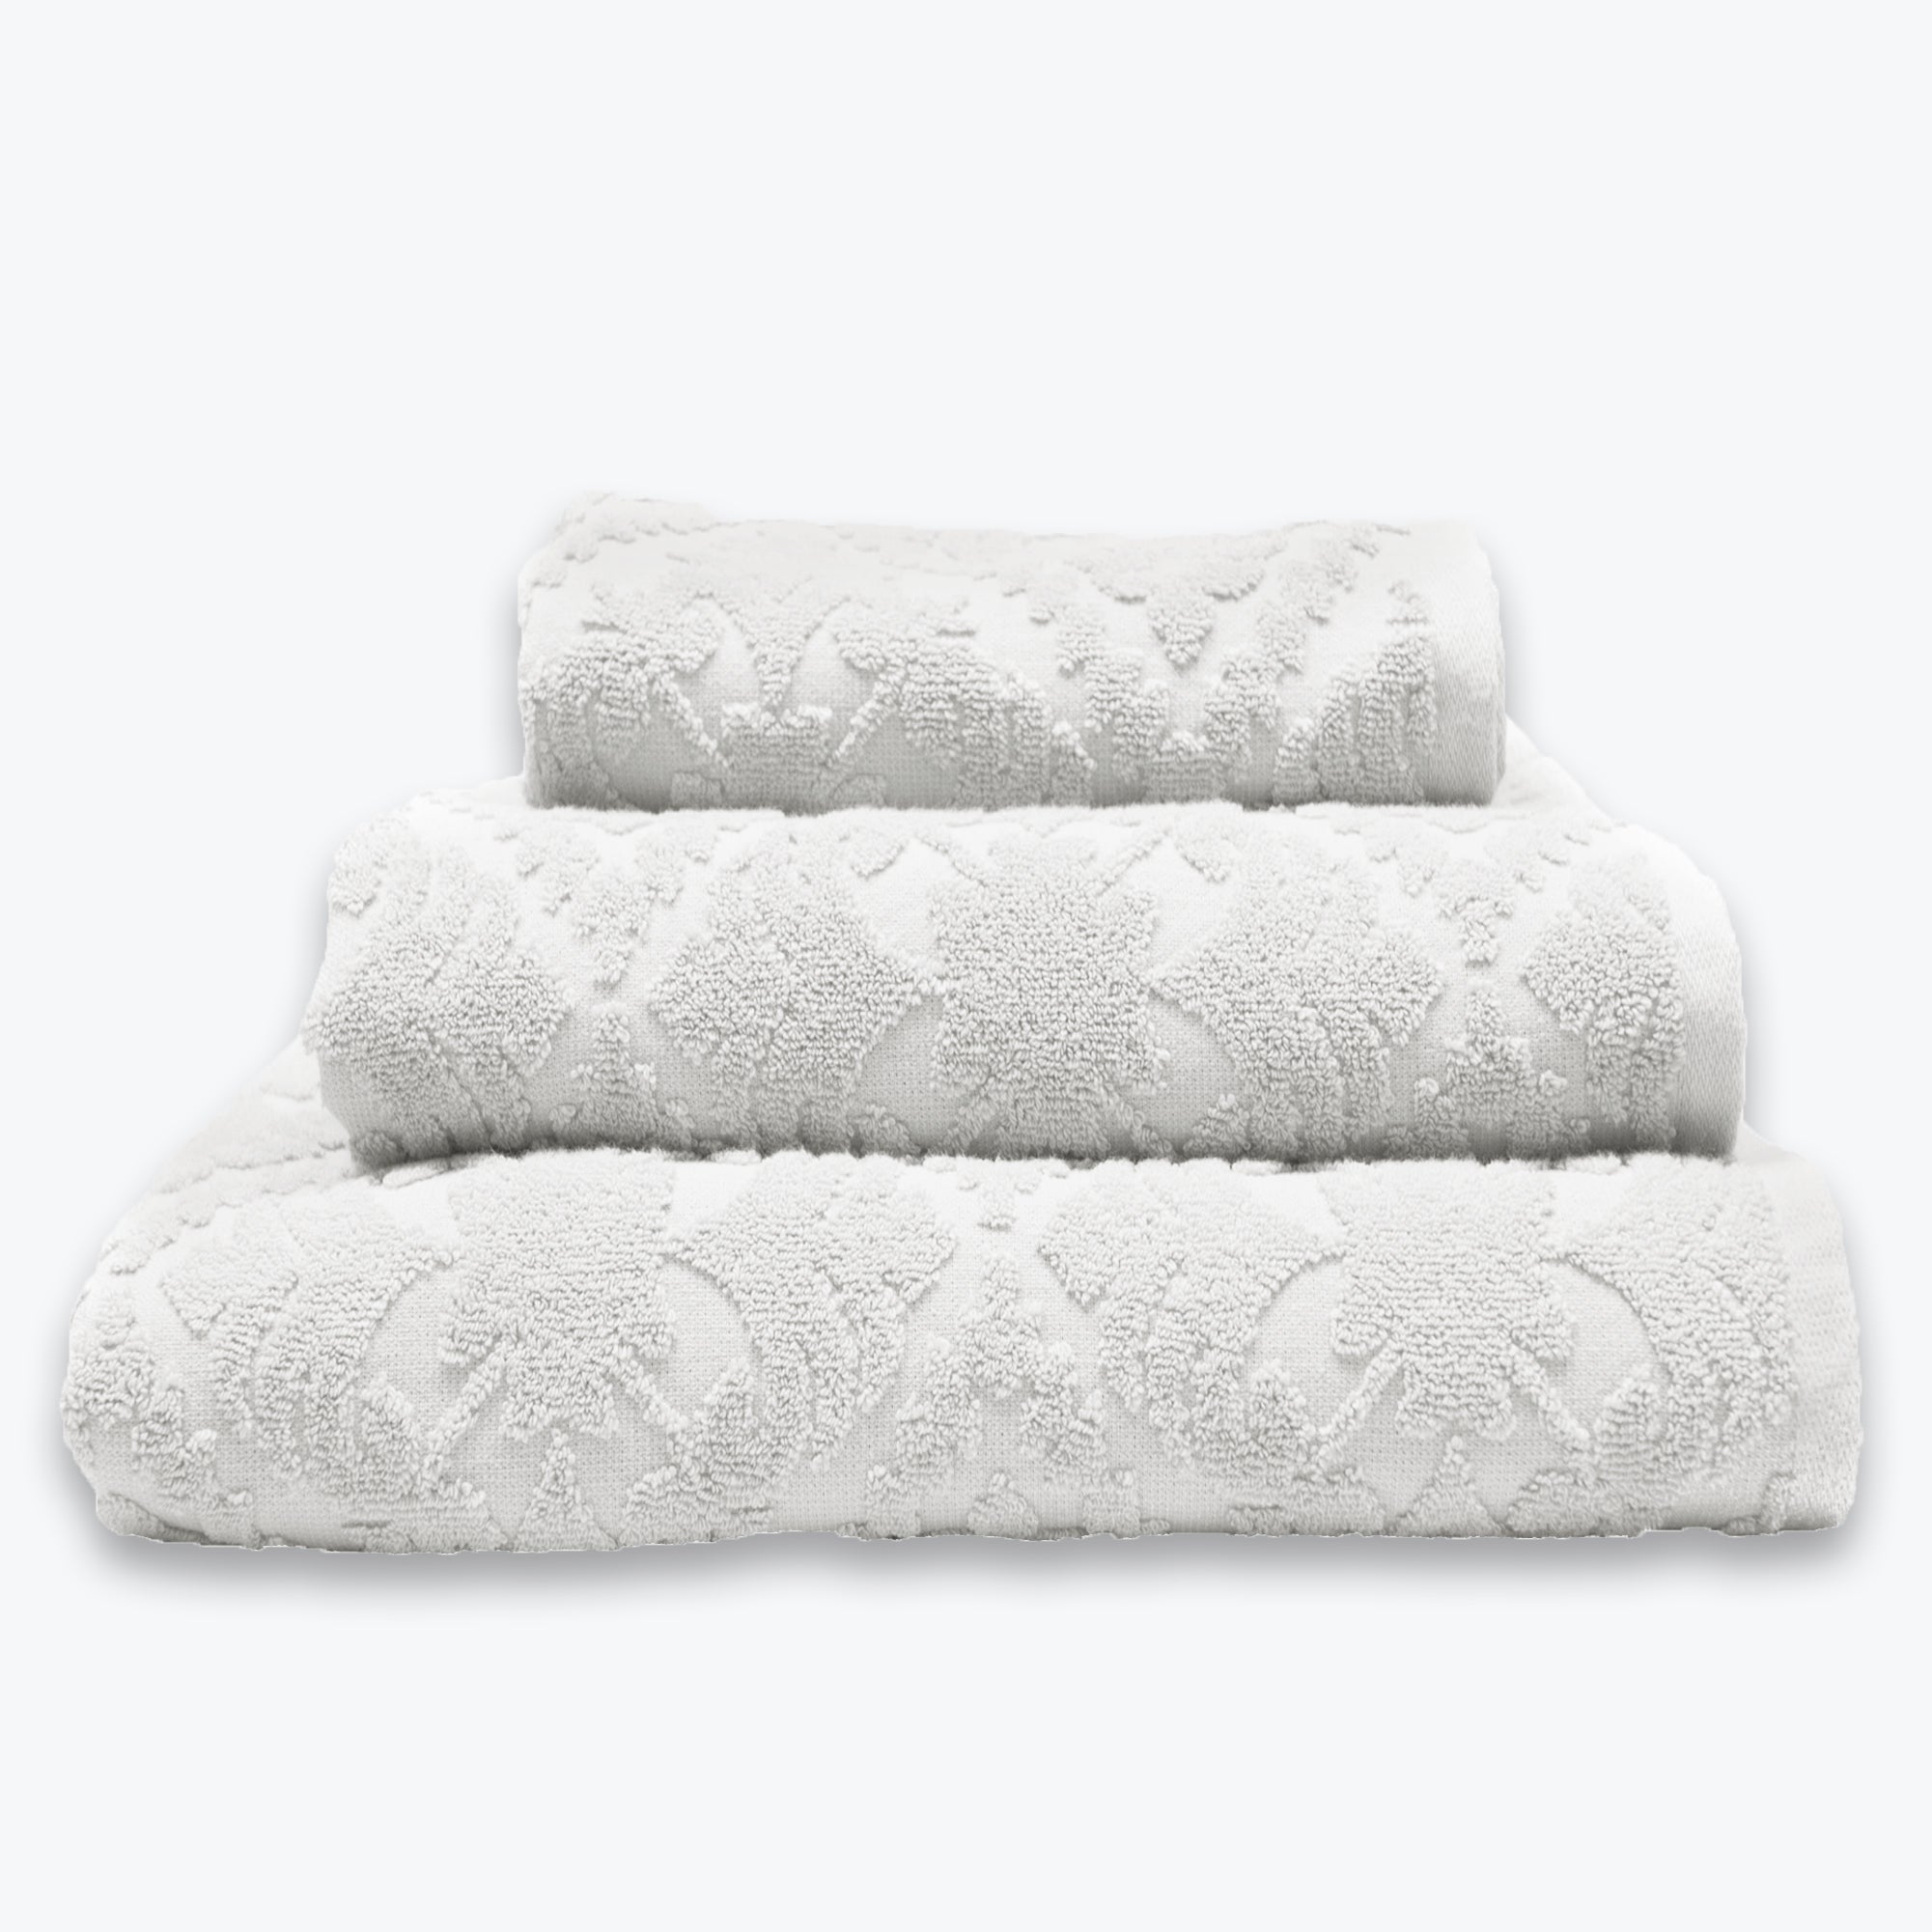 White Country House Towel Set - Floral Textured Bathroom Towels